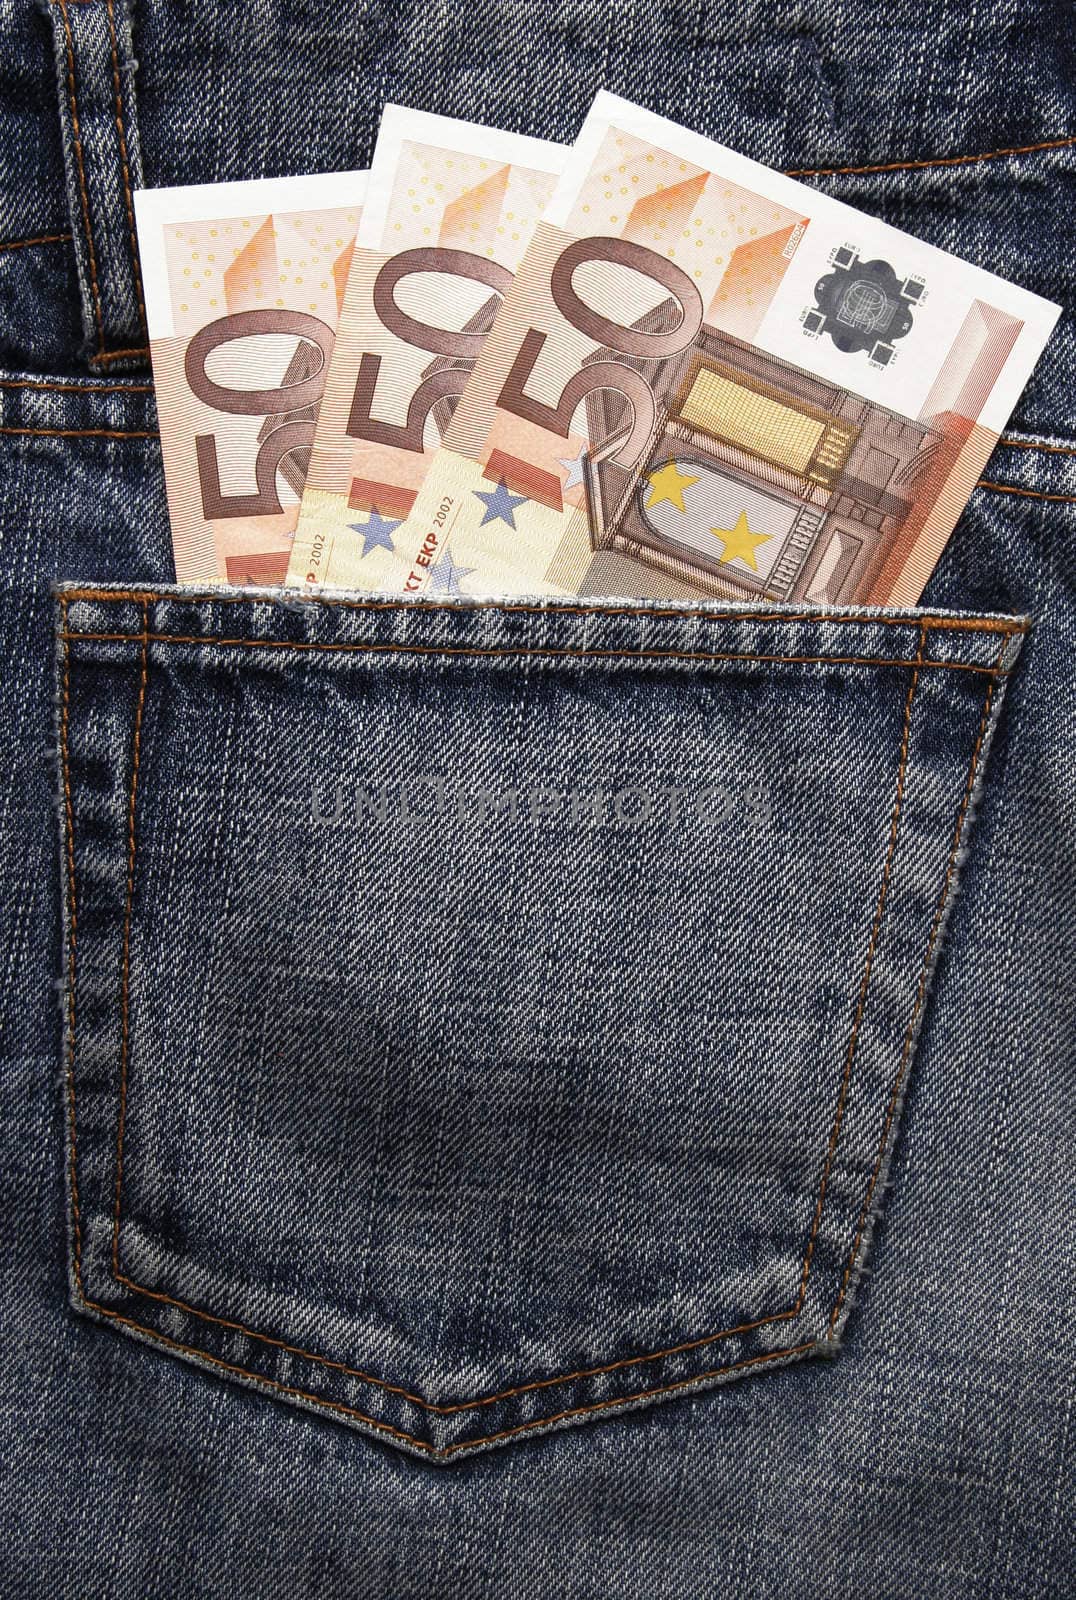 Pocket Money In Blue Jeans - Three Fifty Euro Notes